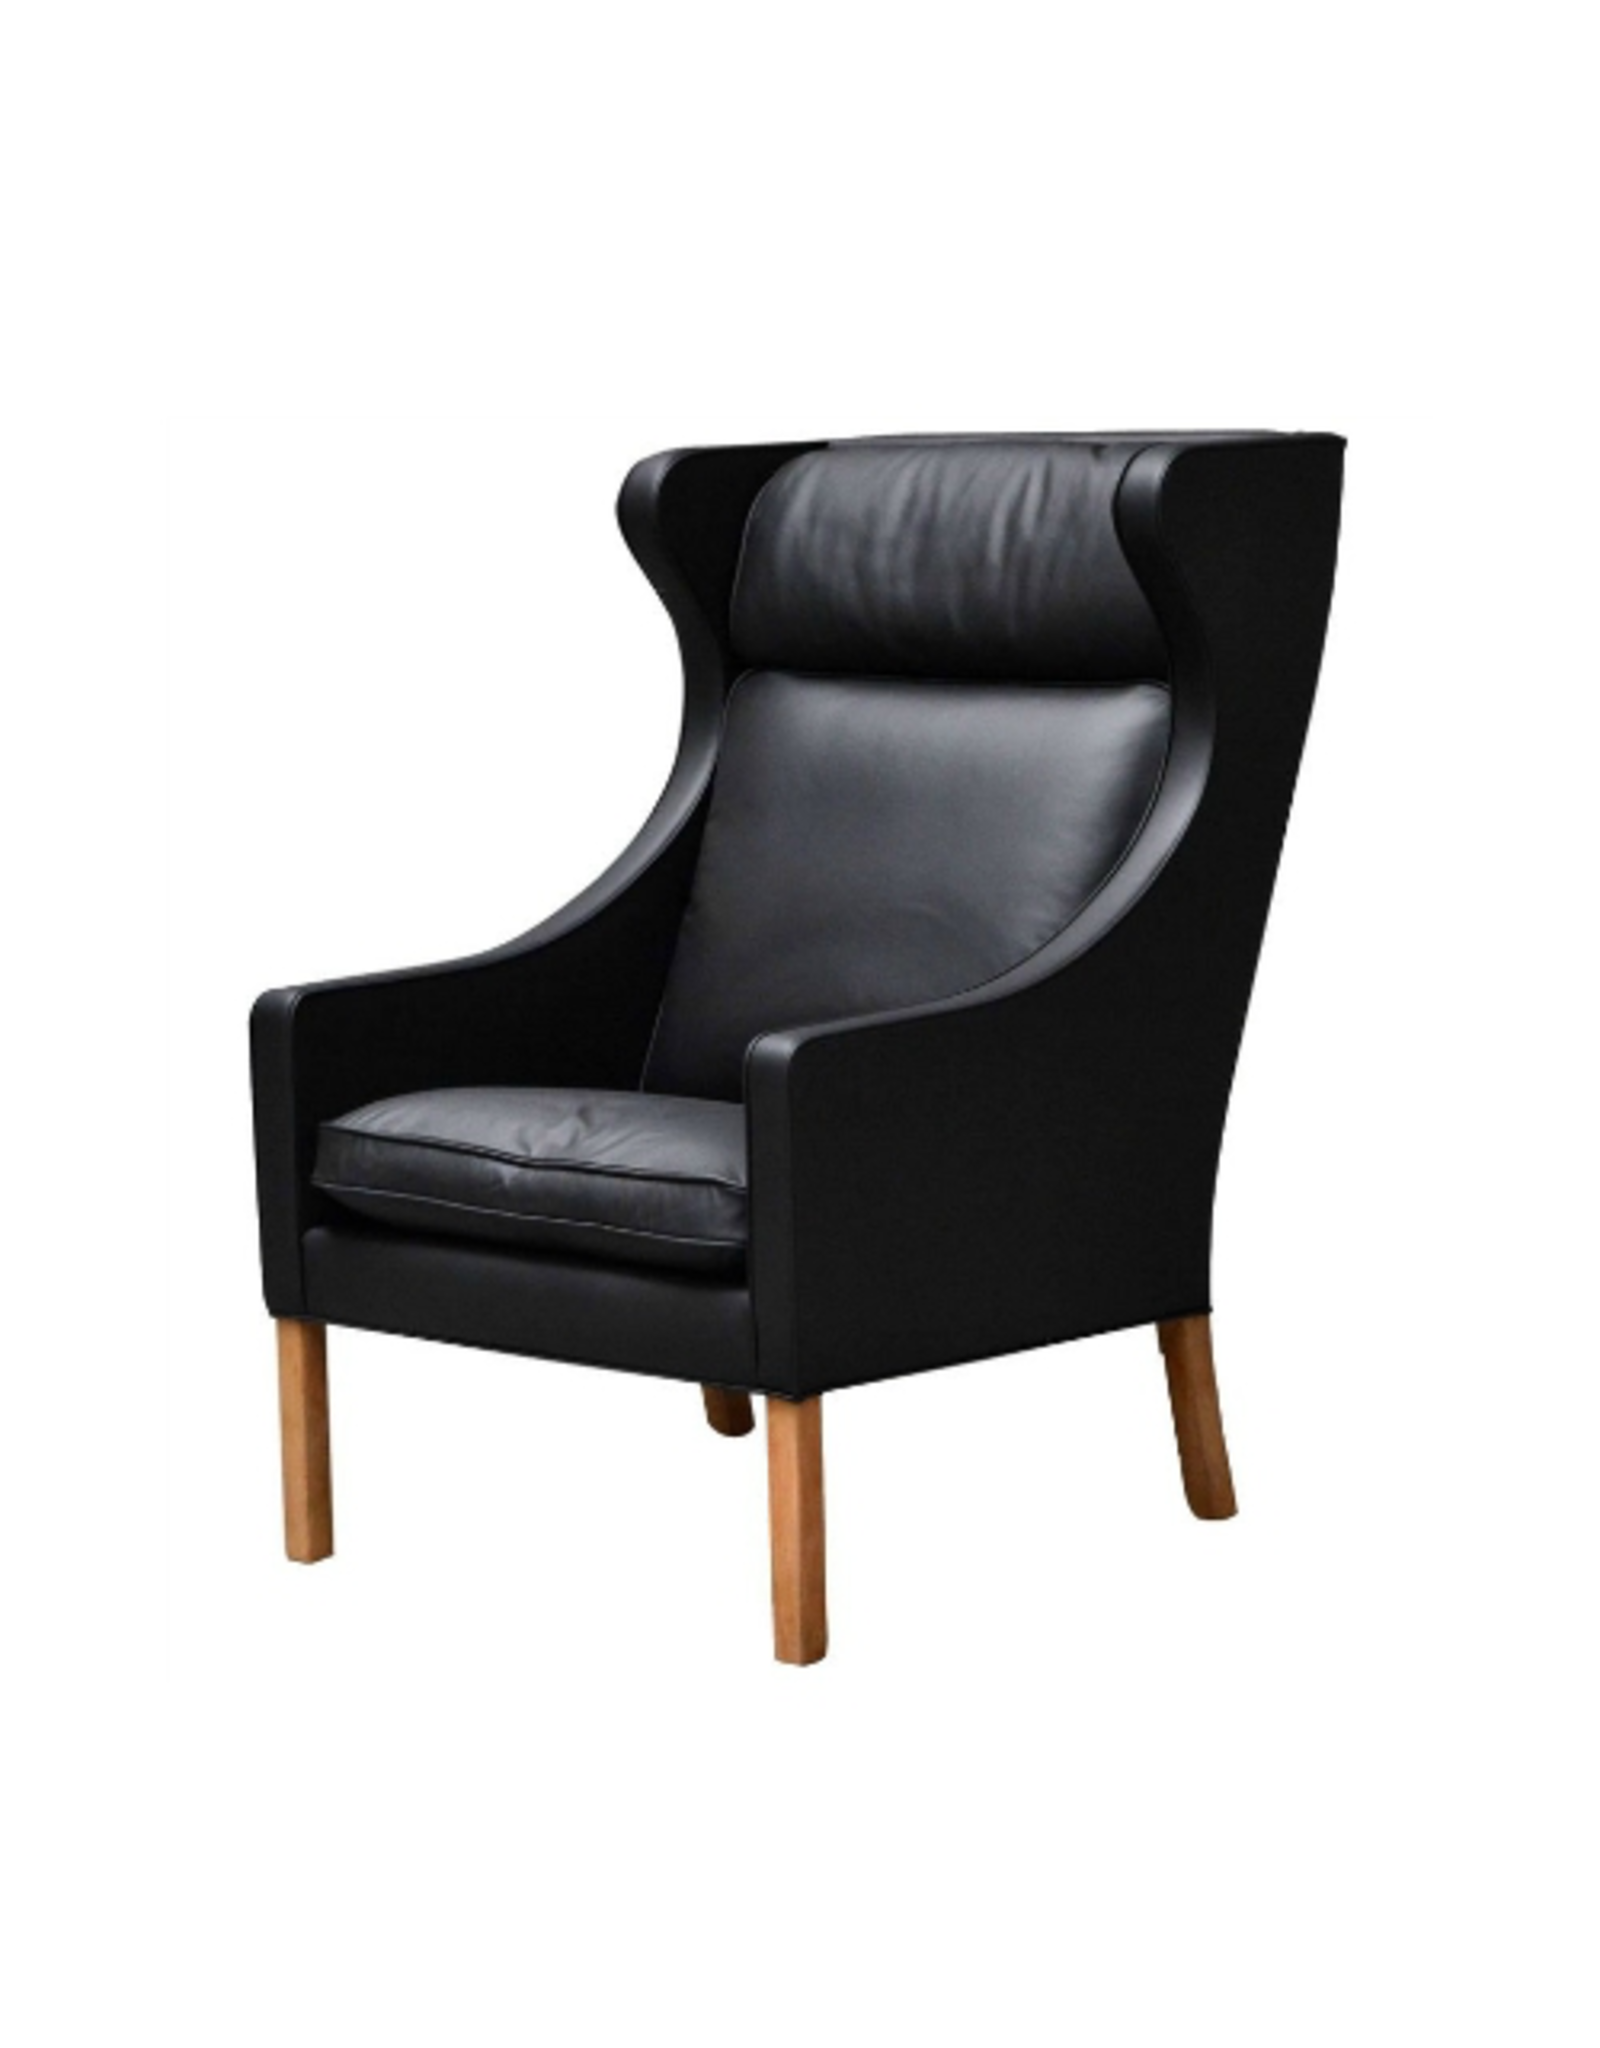 2204 THE WING CHAIR 翼椅